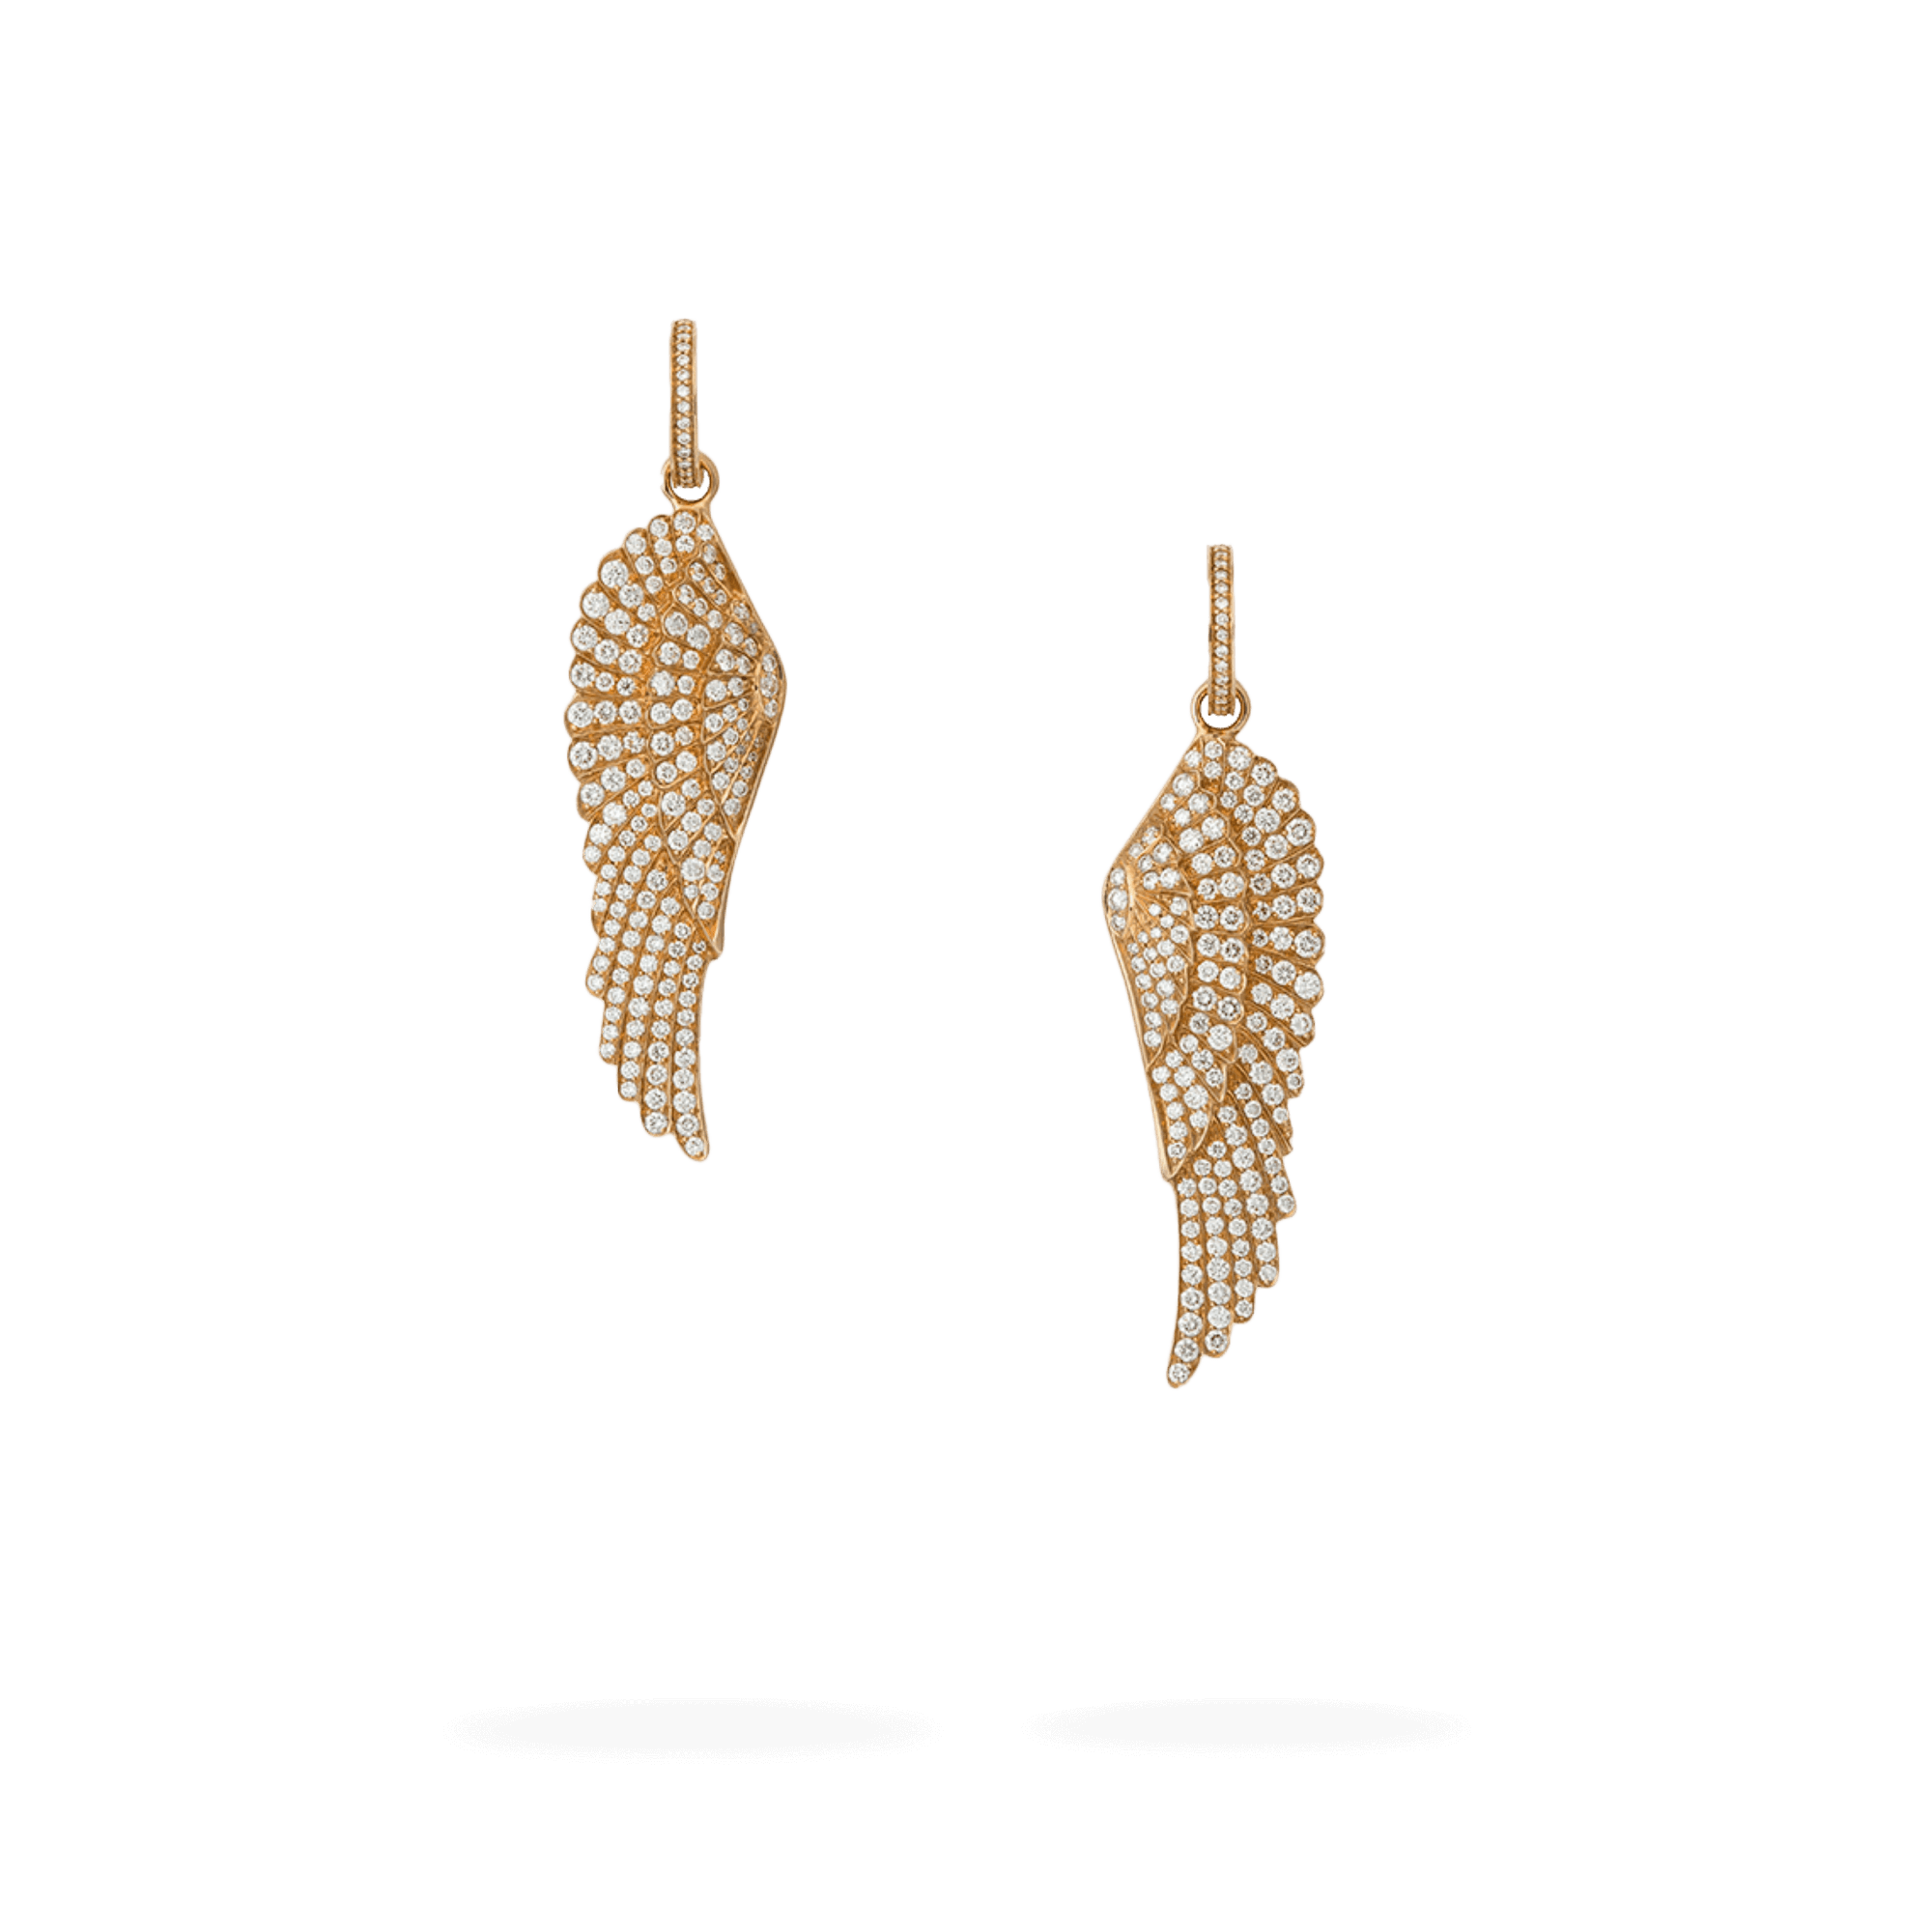 Garrard Wings Classic jewellery collection Hoop and Drop Diamond Earrings In 18ct Yellow Gold 2013183